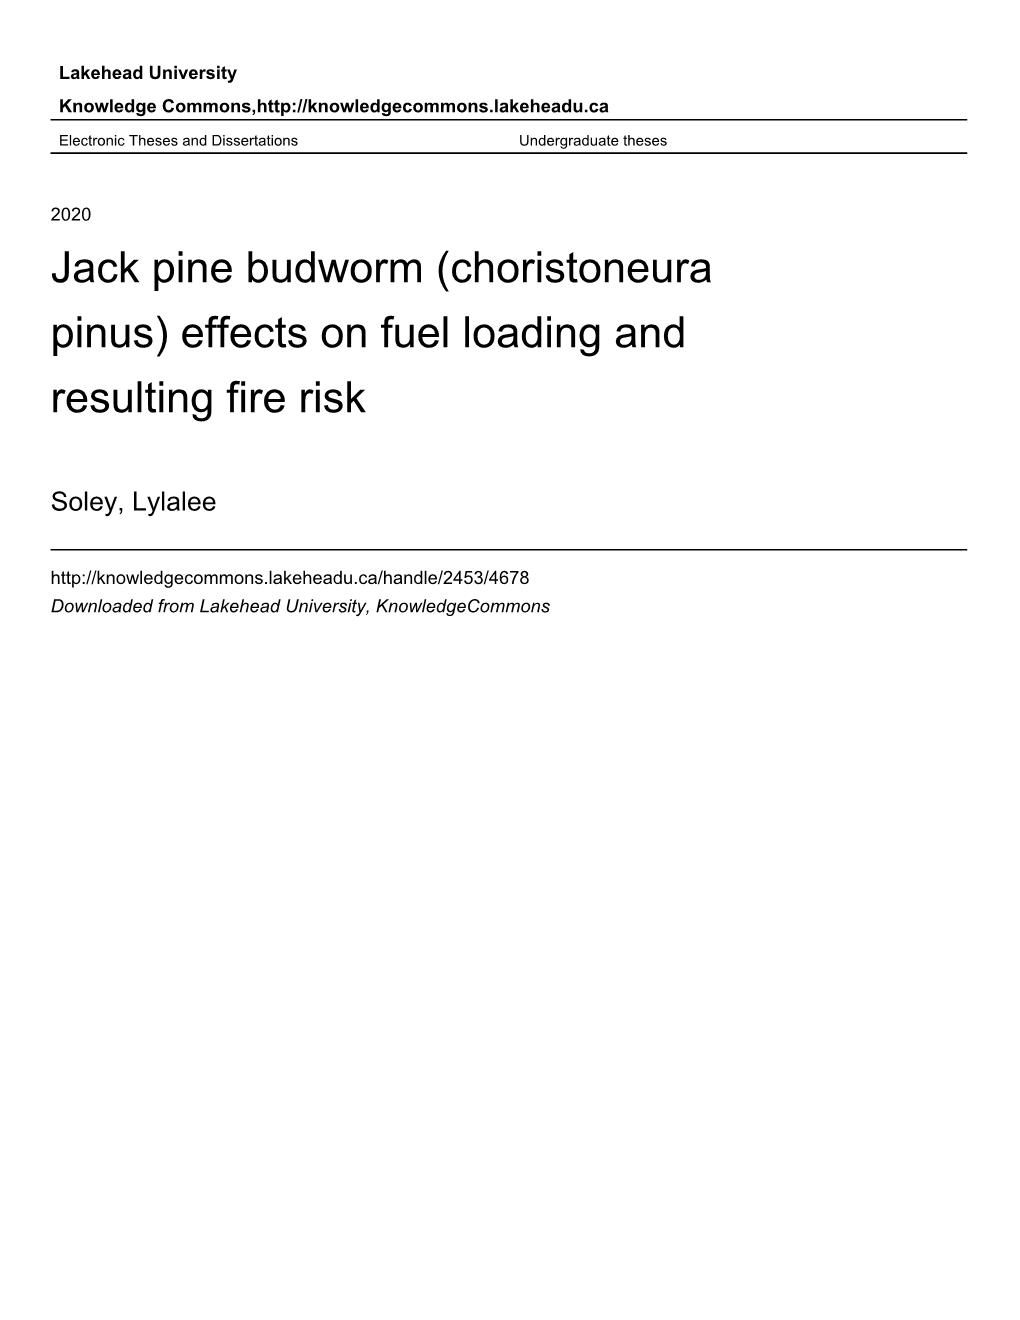 Jack Pine Budworm (Choristoneura Pinus) Effects on Fuel Loading and Resulting Fire Risk